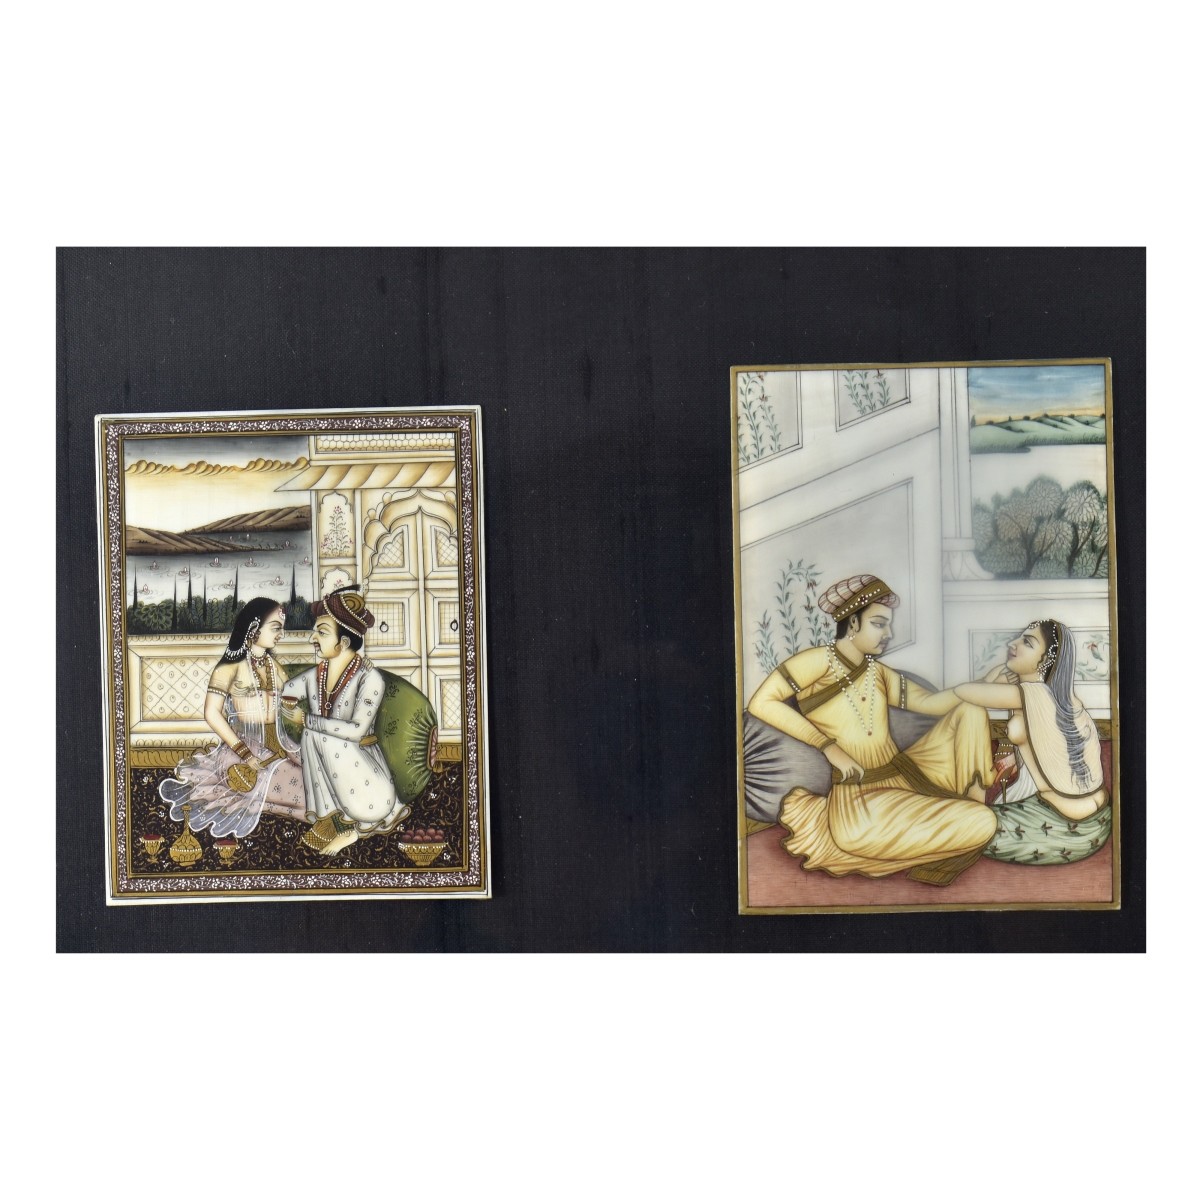 Indian Framed Mughal Painted Miniatures